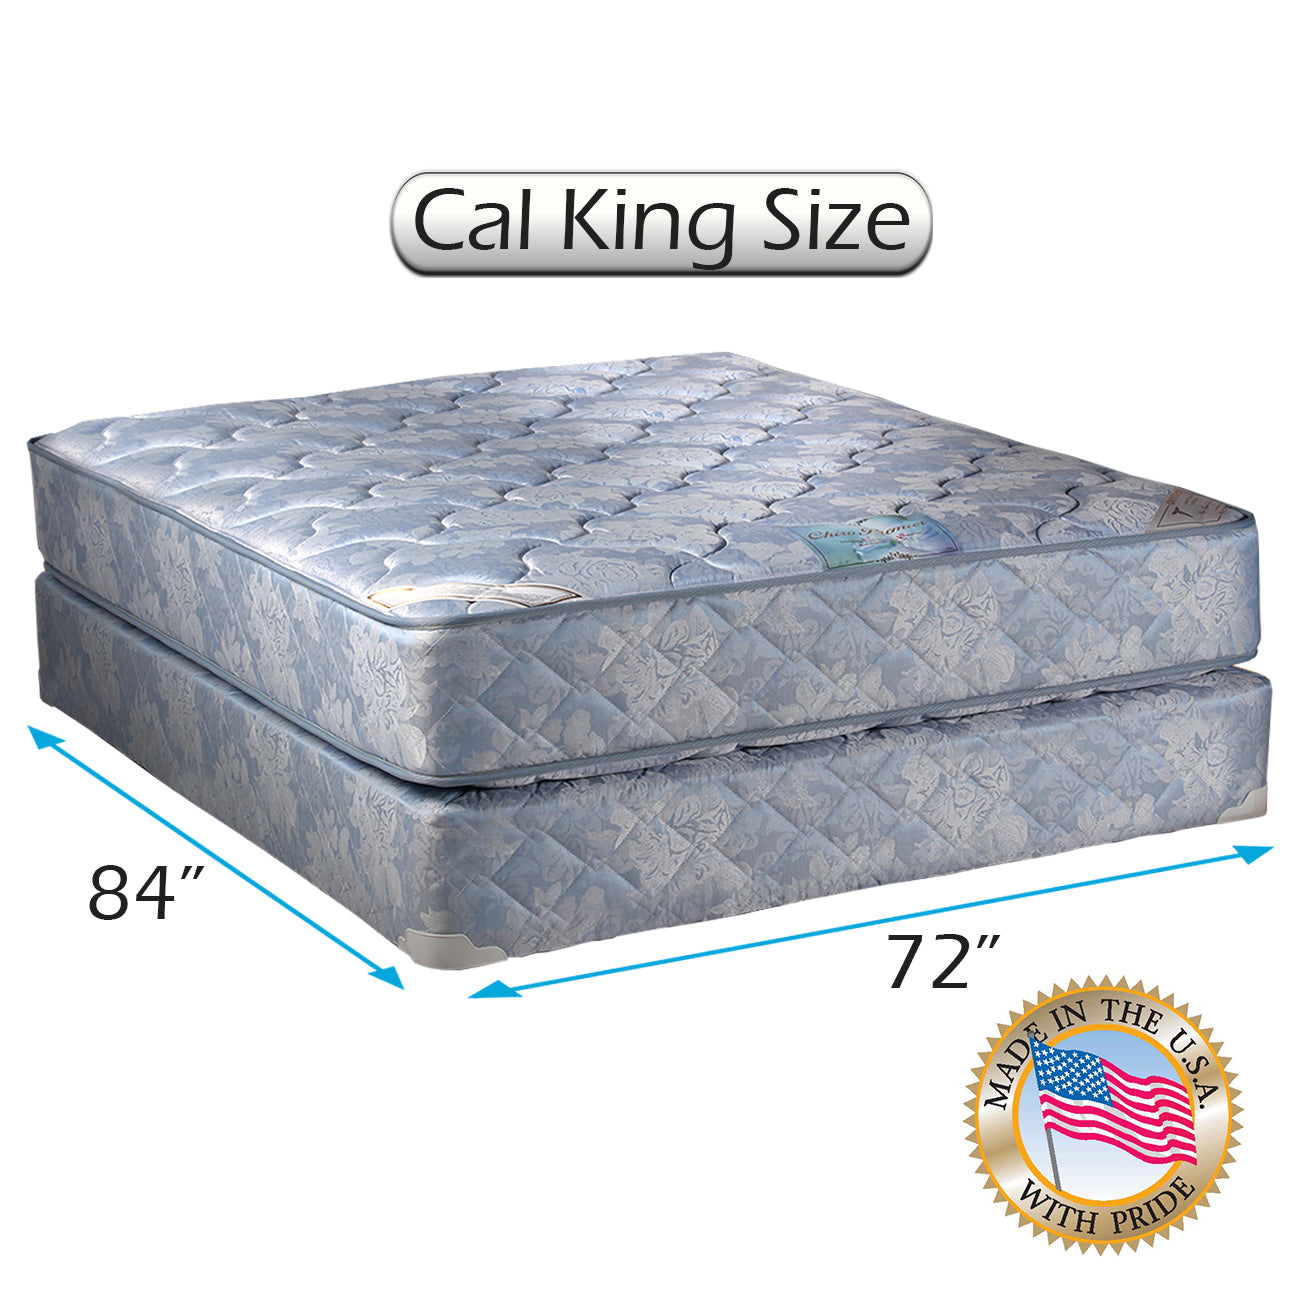 Chiro Premier Orthopedic Gentle Firm (Blue Color) California King Size Mattress and Box Spring Set - Fully Assembled, Good for Your Back, Long Lasting and 2 Sided